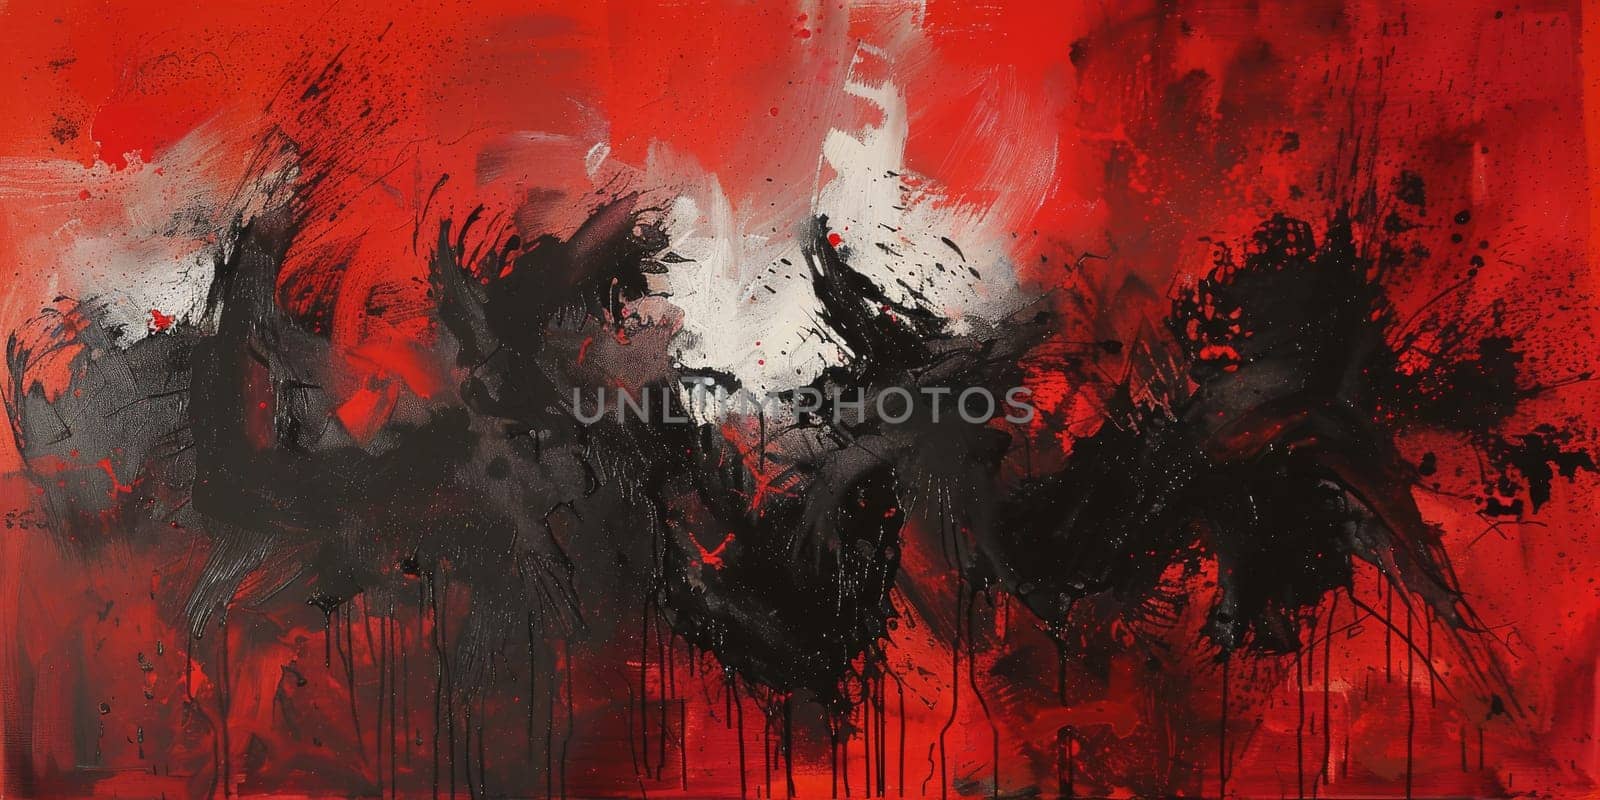 Abstract artwork featuring swirling black and red colors in a vibrant composition by Kadula